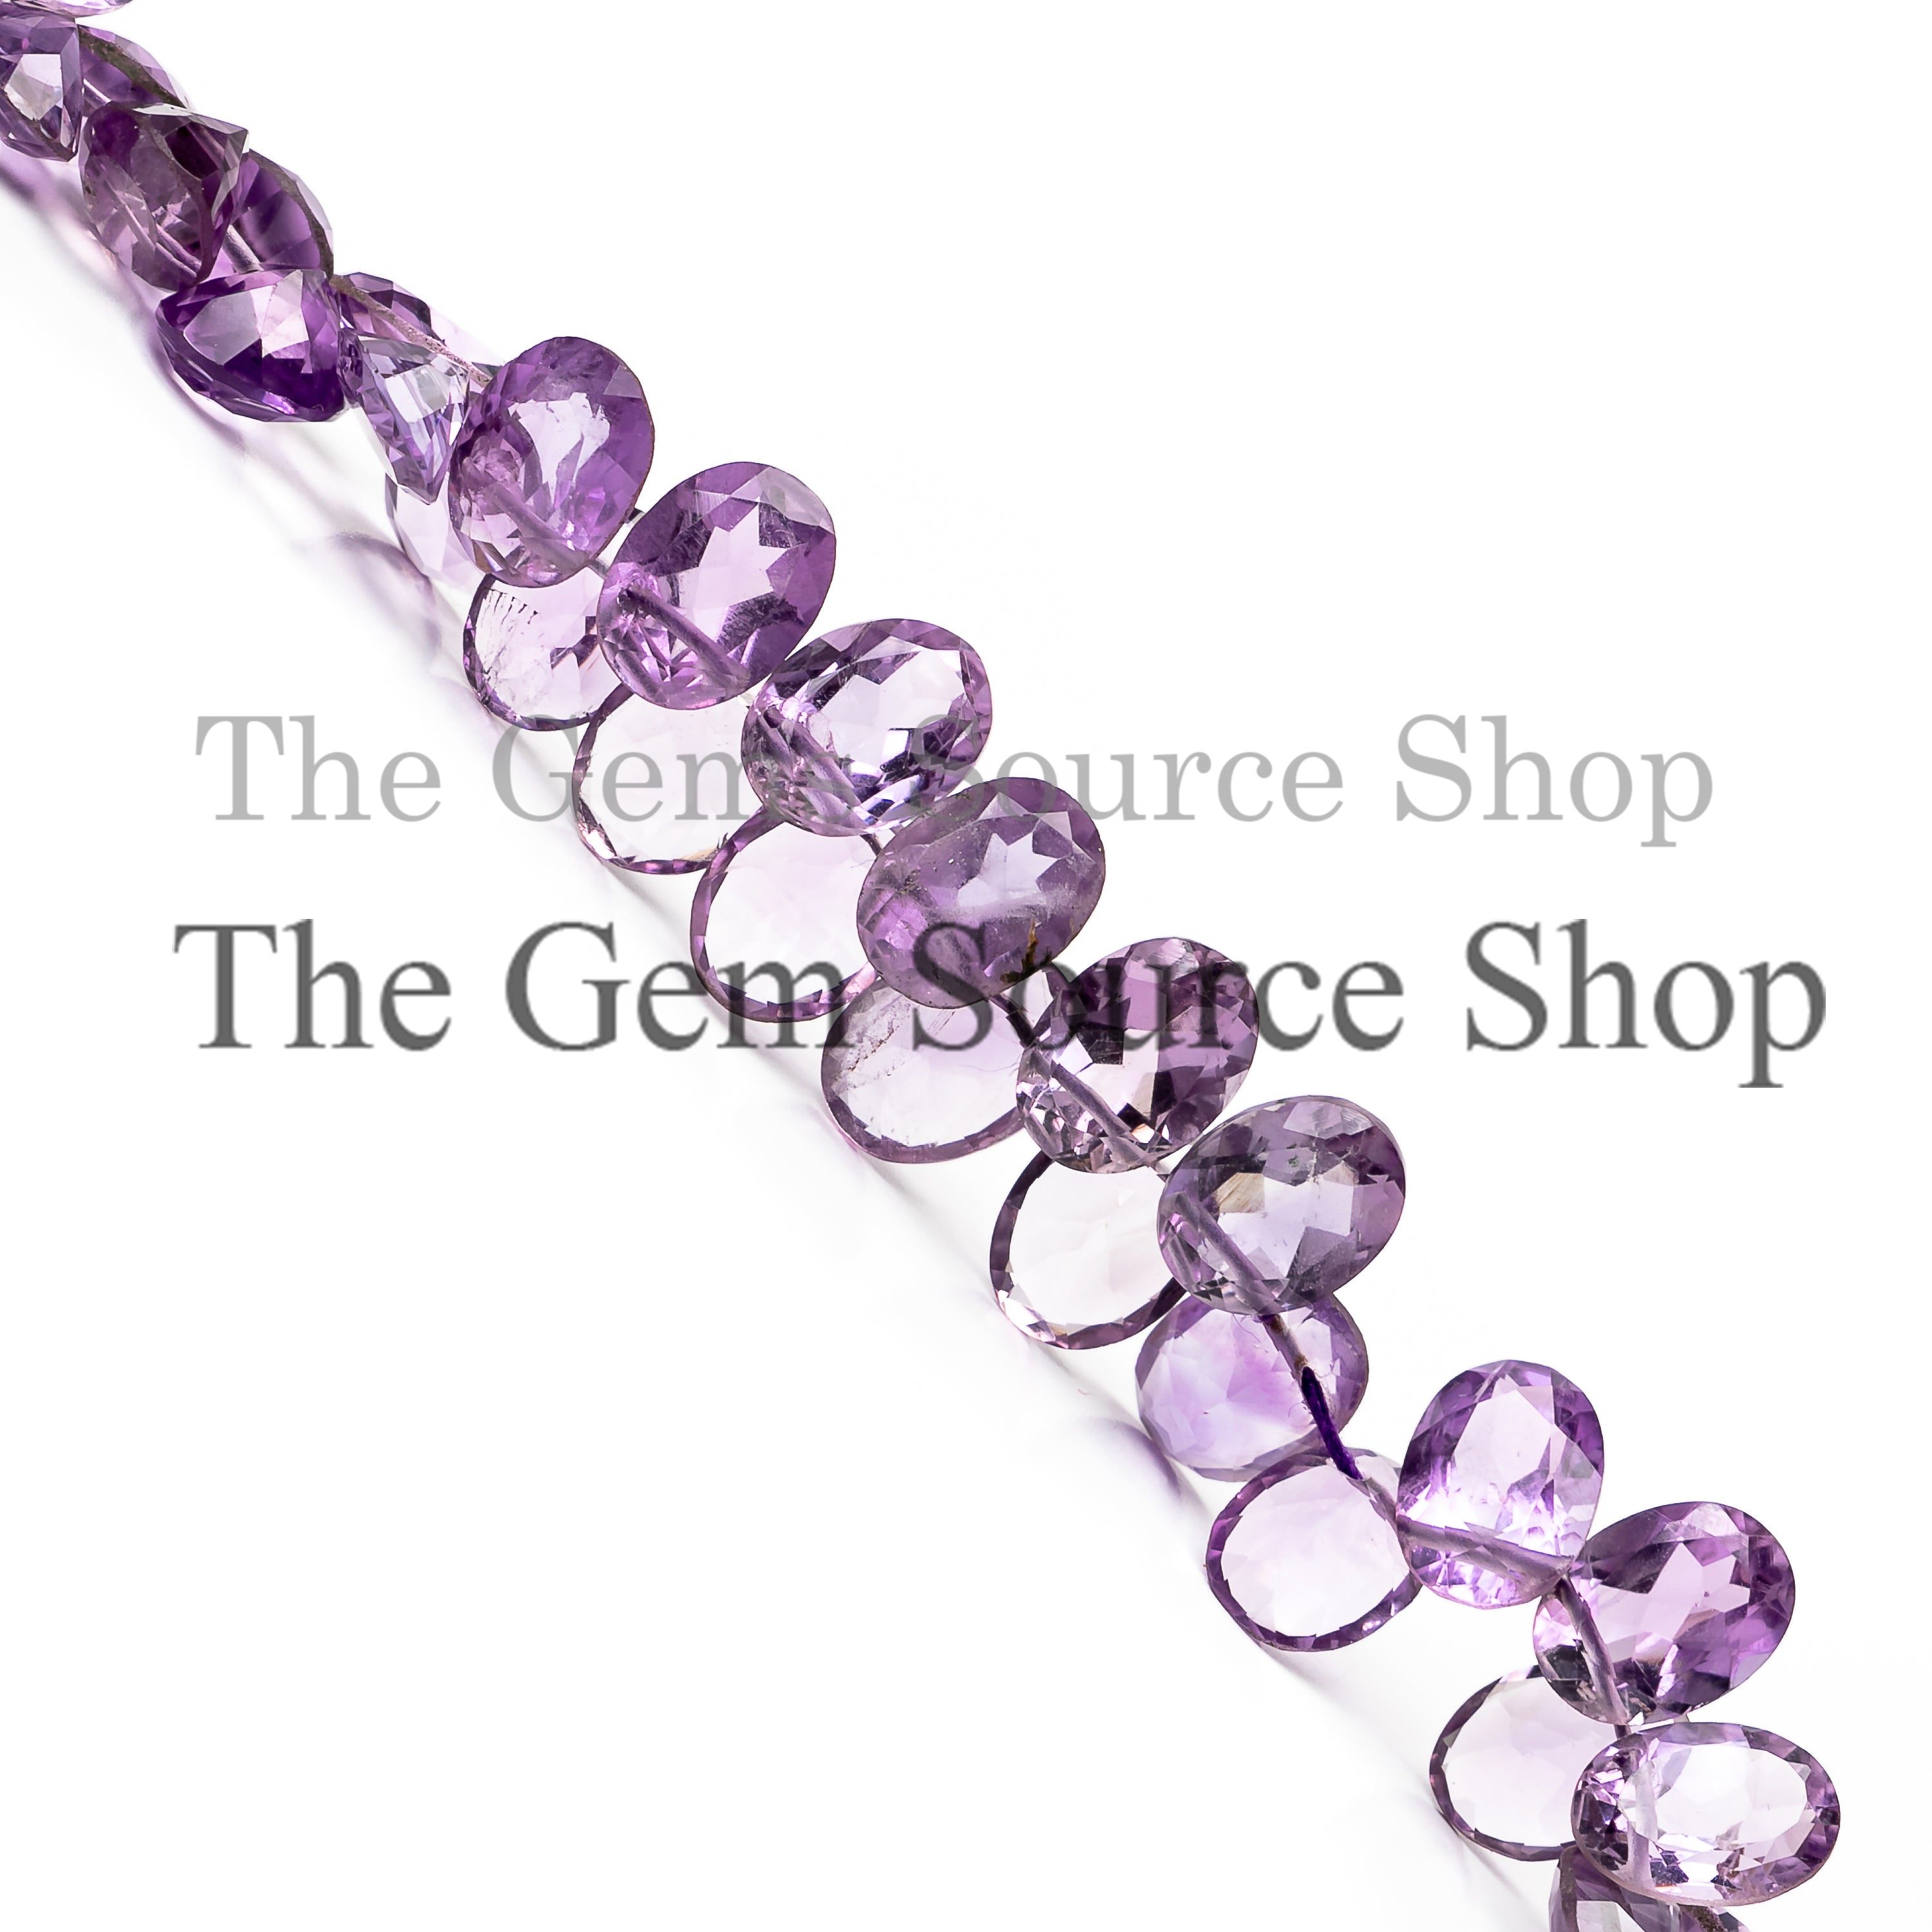 Amethyst Faceted Briolette Cut Oval Shape Gemstone Beads, Faceted Pink Amethyst Beads, Amethyst Oval Beads, Amethyst Briolette